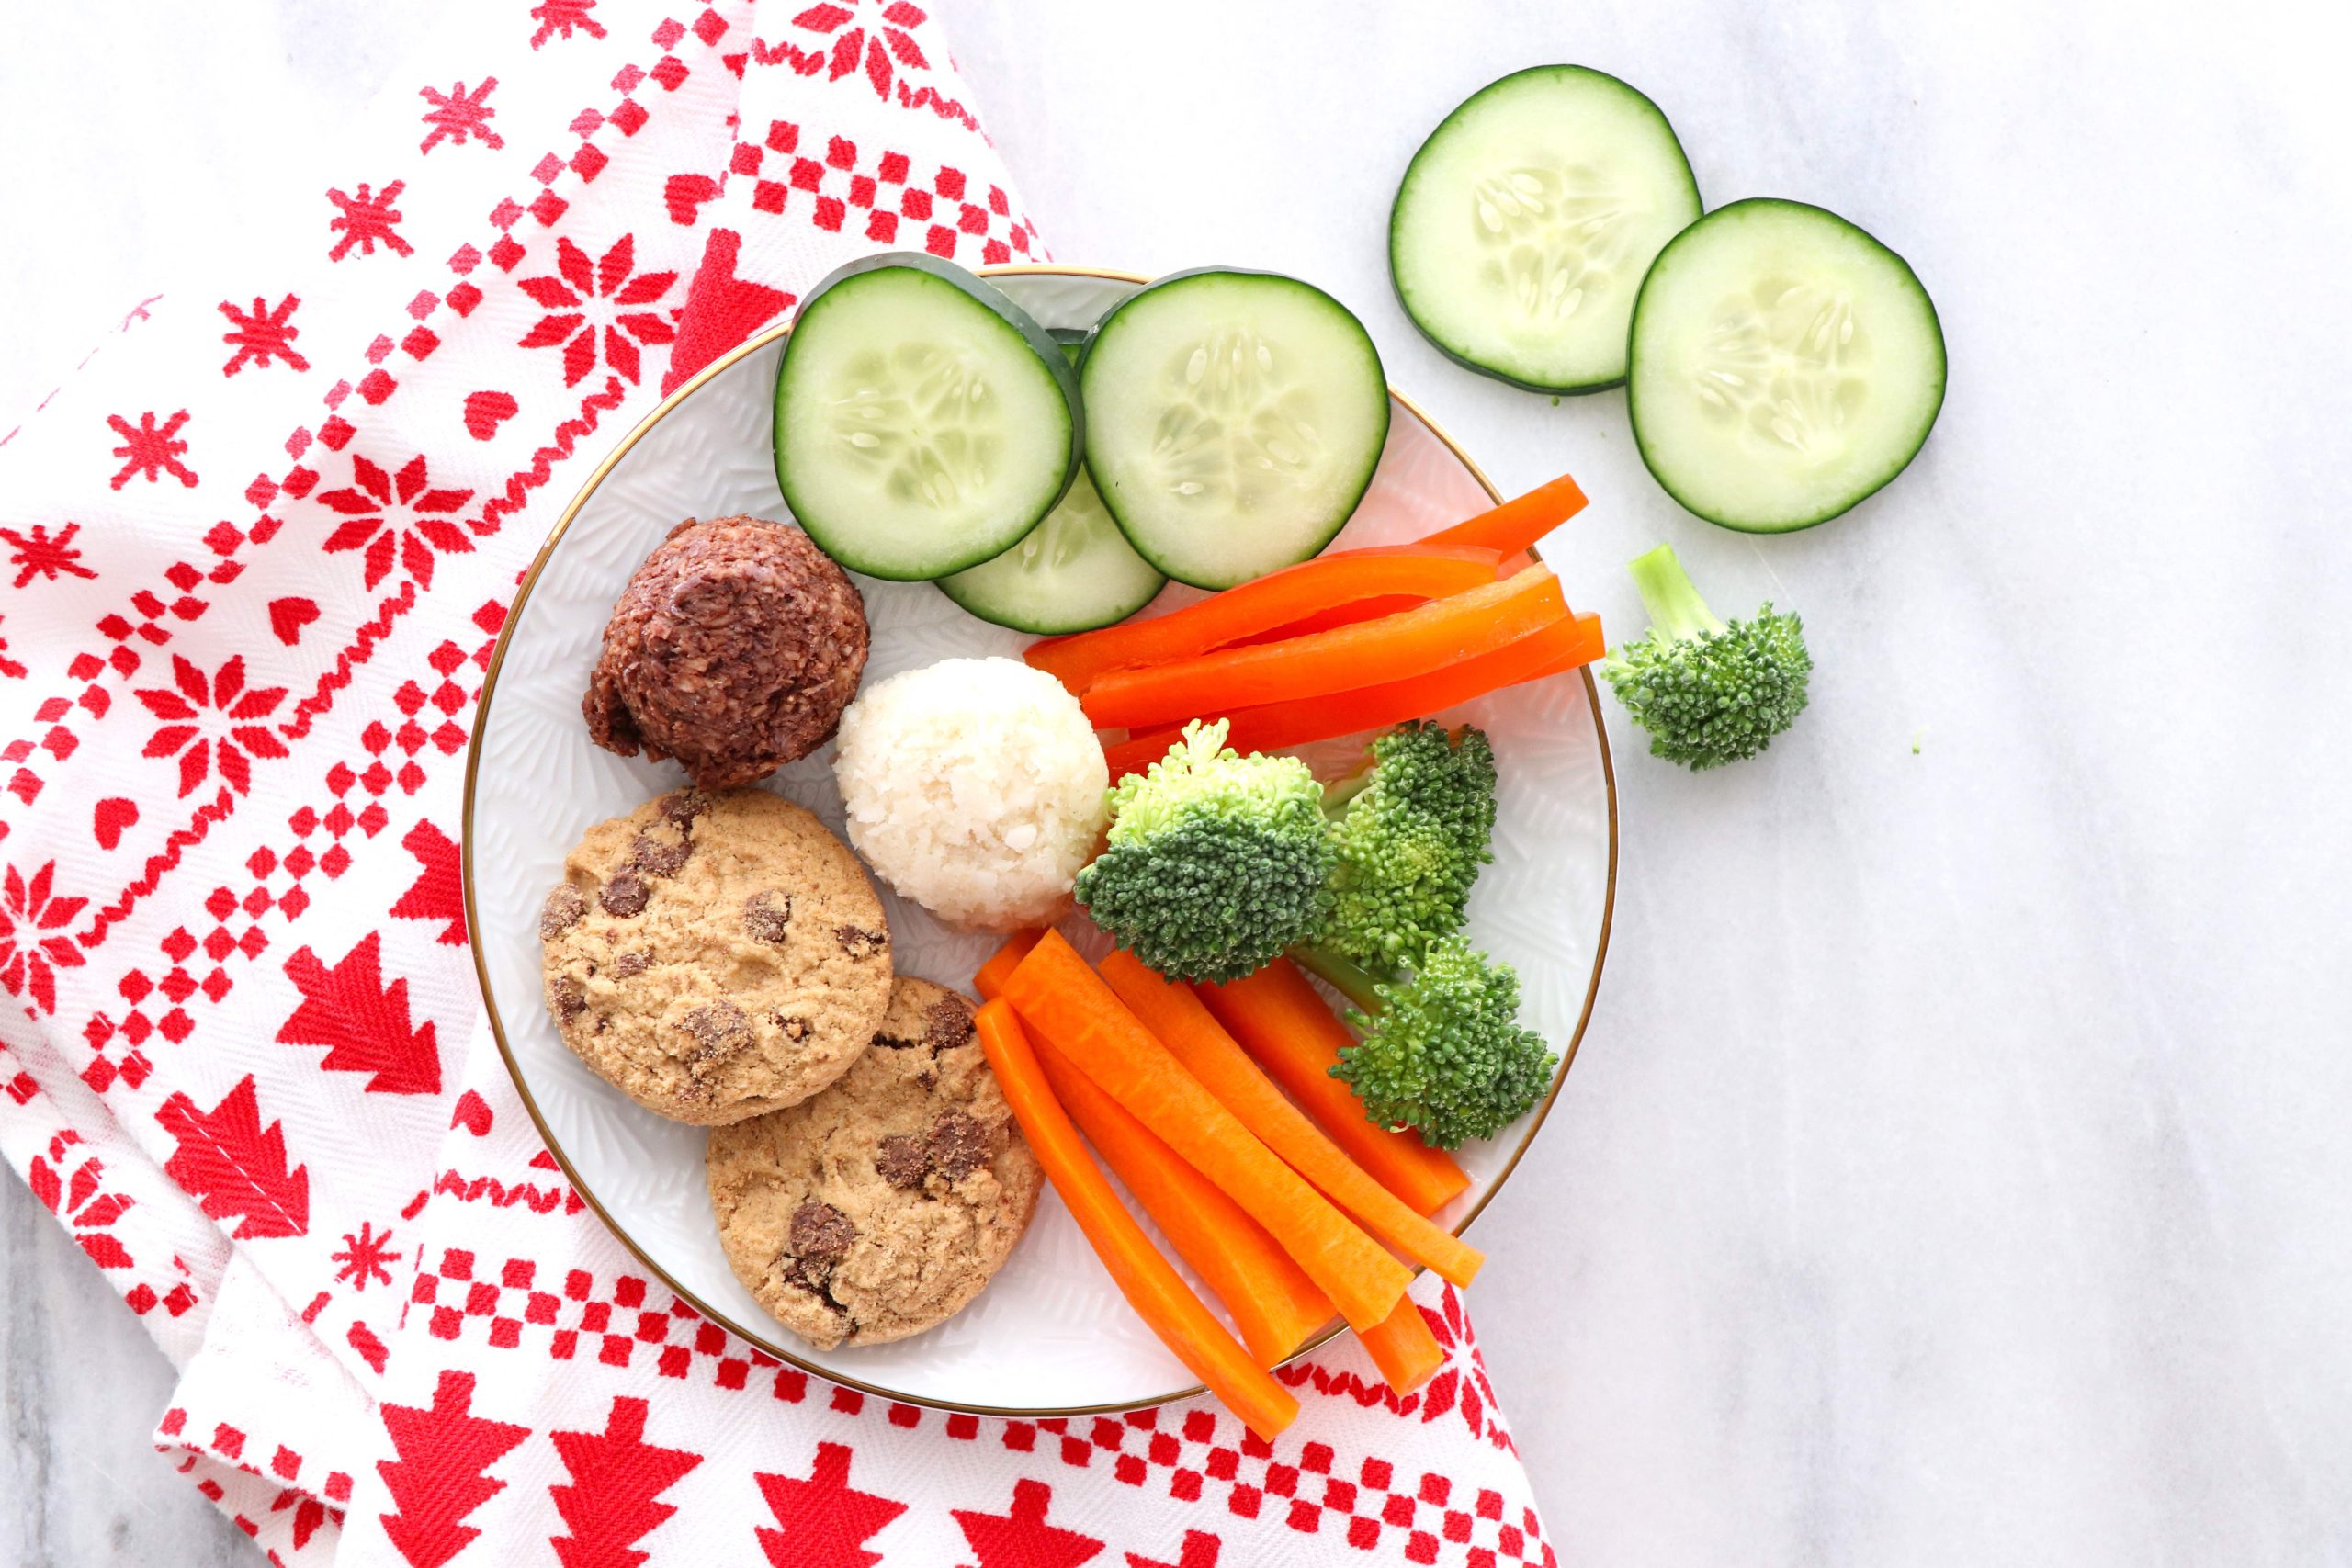 5 Ways a Nutritionist Eats Healthy During Holiday Party Season